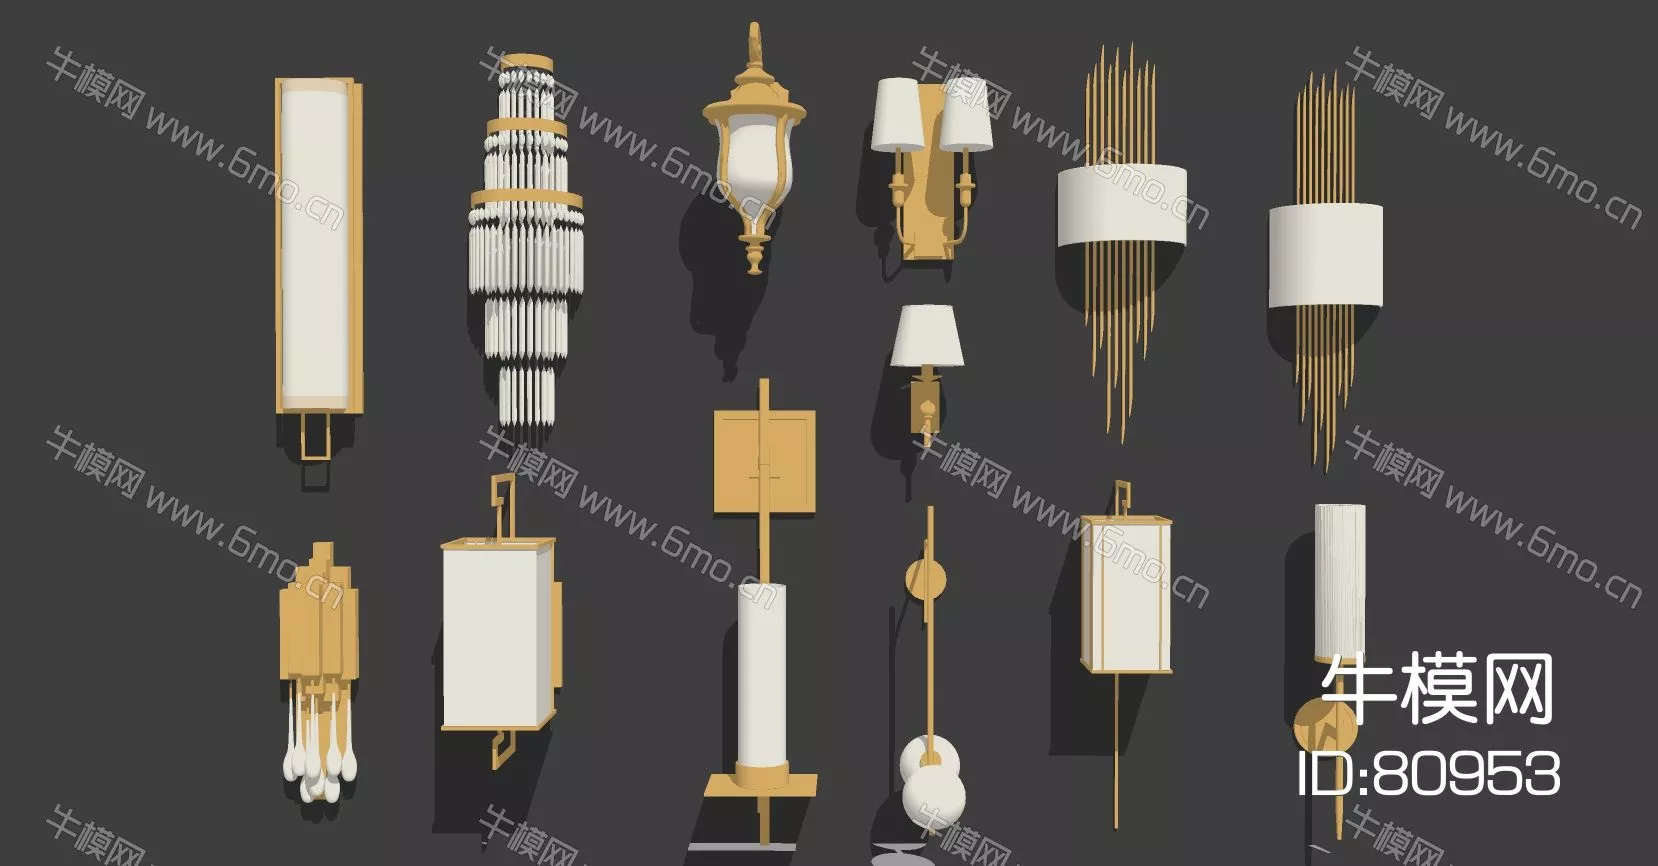 EUROPE WALL LAMP - SKETCHUP 3D MODEL - ENSCAPE - 80953